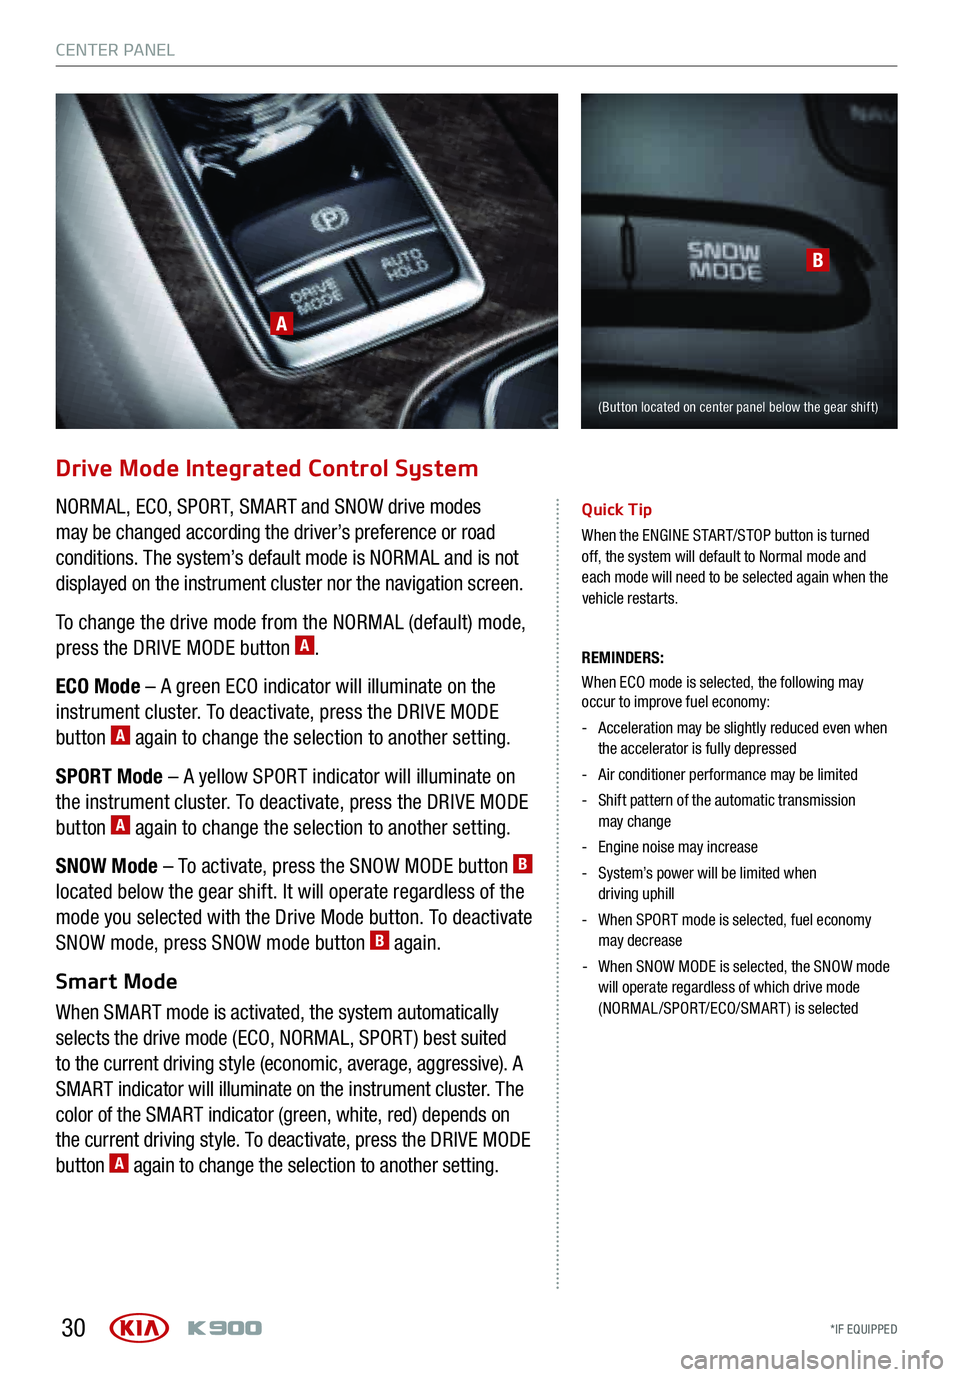 KIA K900 2016  Features and Functions Guide CENTER PA NEL
*IF EQUIPPED  30
Drive Mode Integrated  Control Syste\f
NORMAL, ECO, SPORT,  SMART  and SNOW  drive modes  
may  be changed  according  the driver’s  preference  or road  
conditions. 